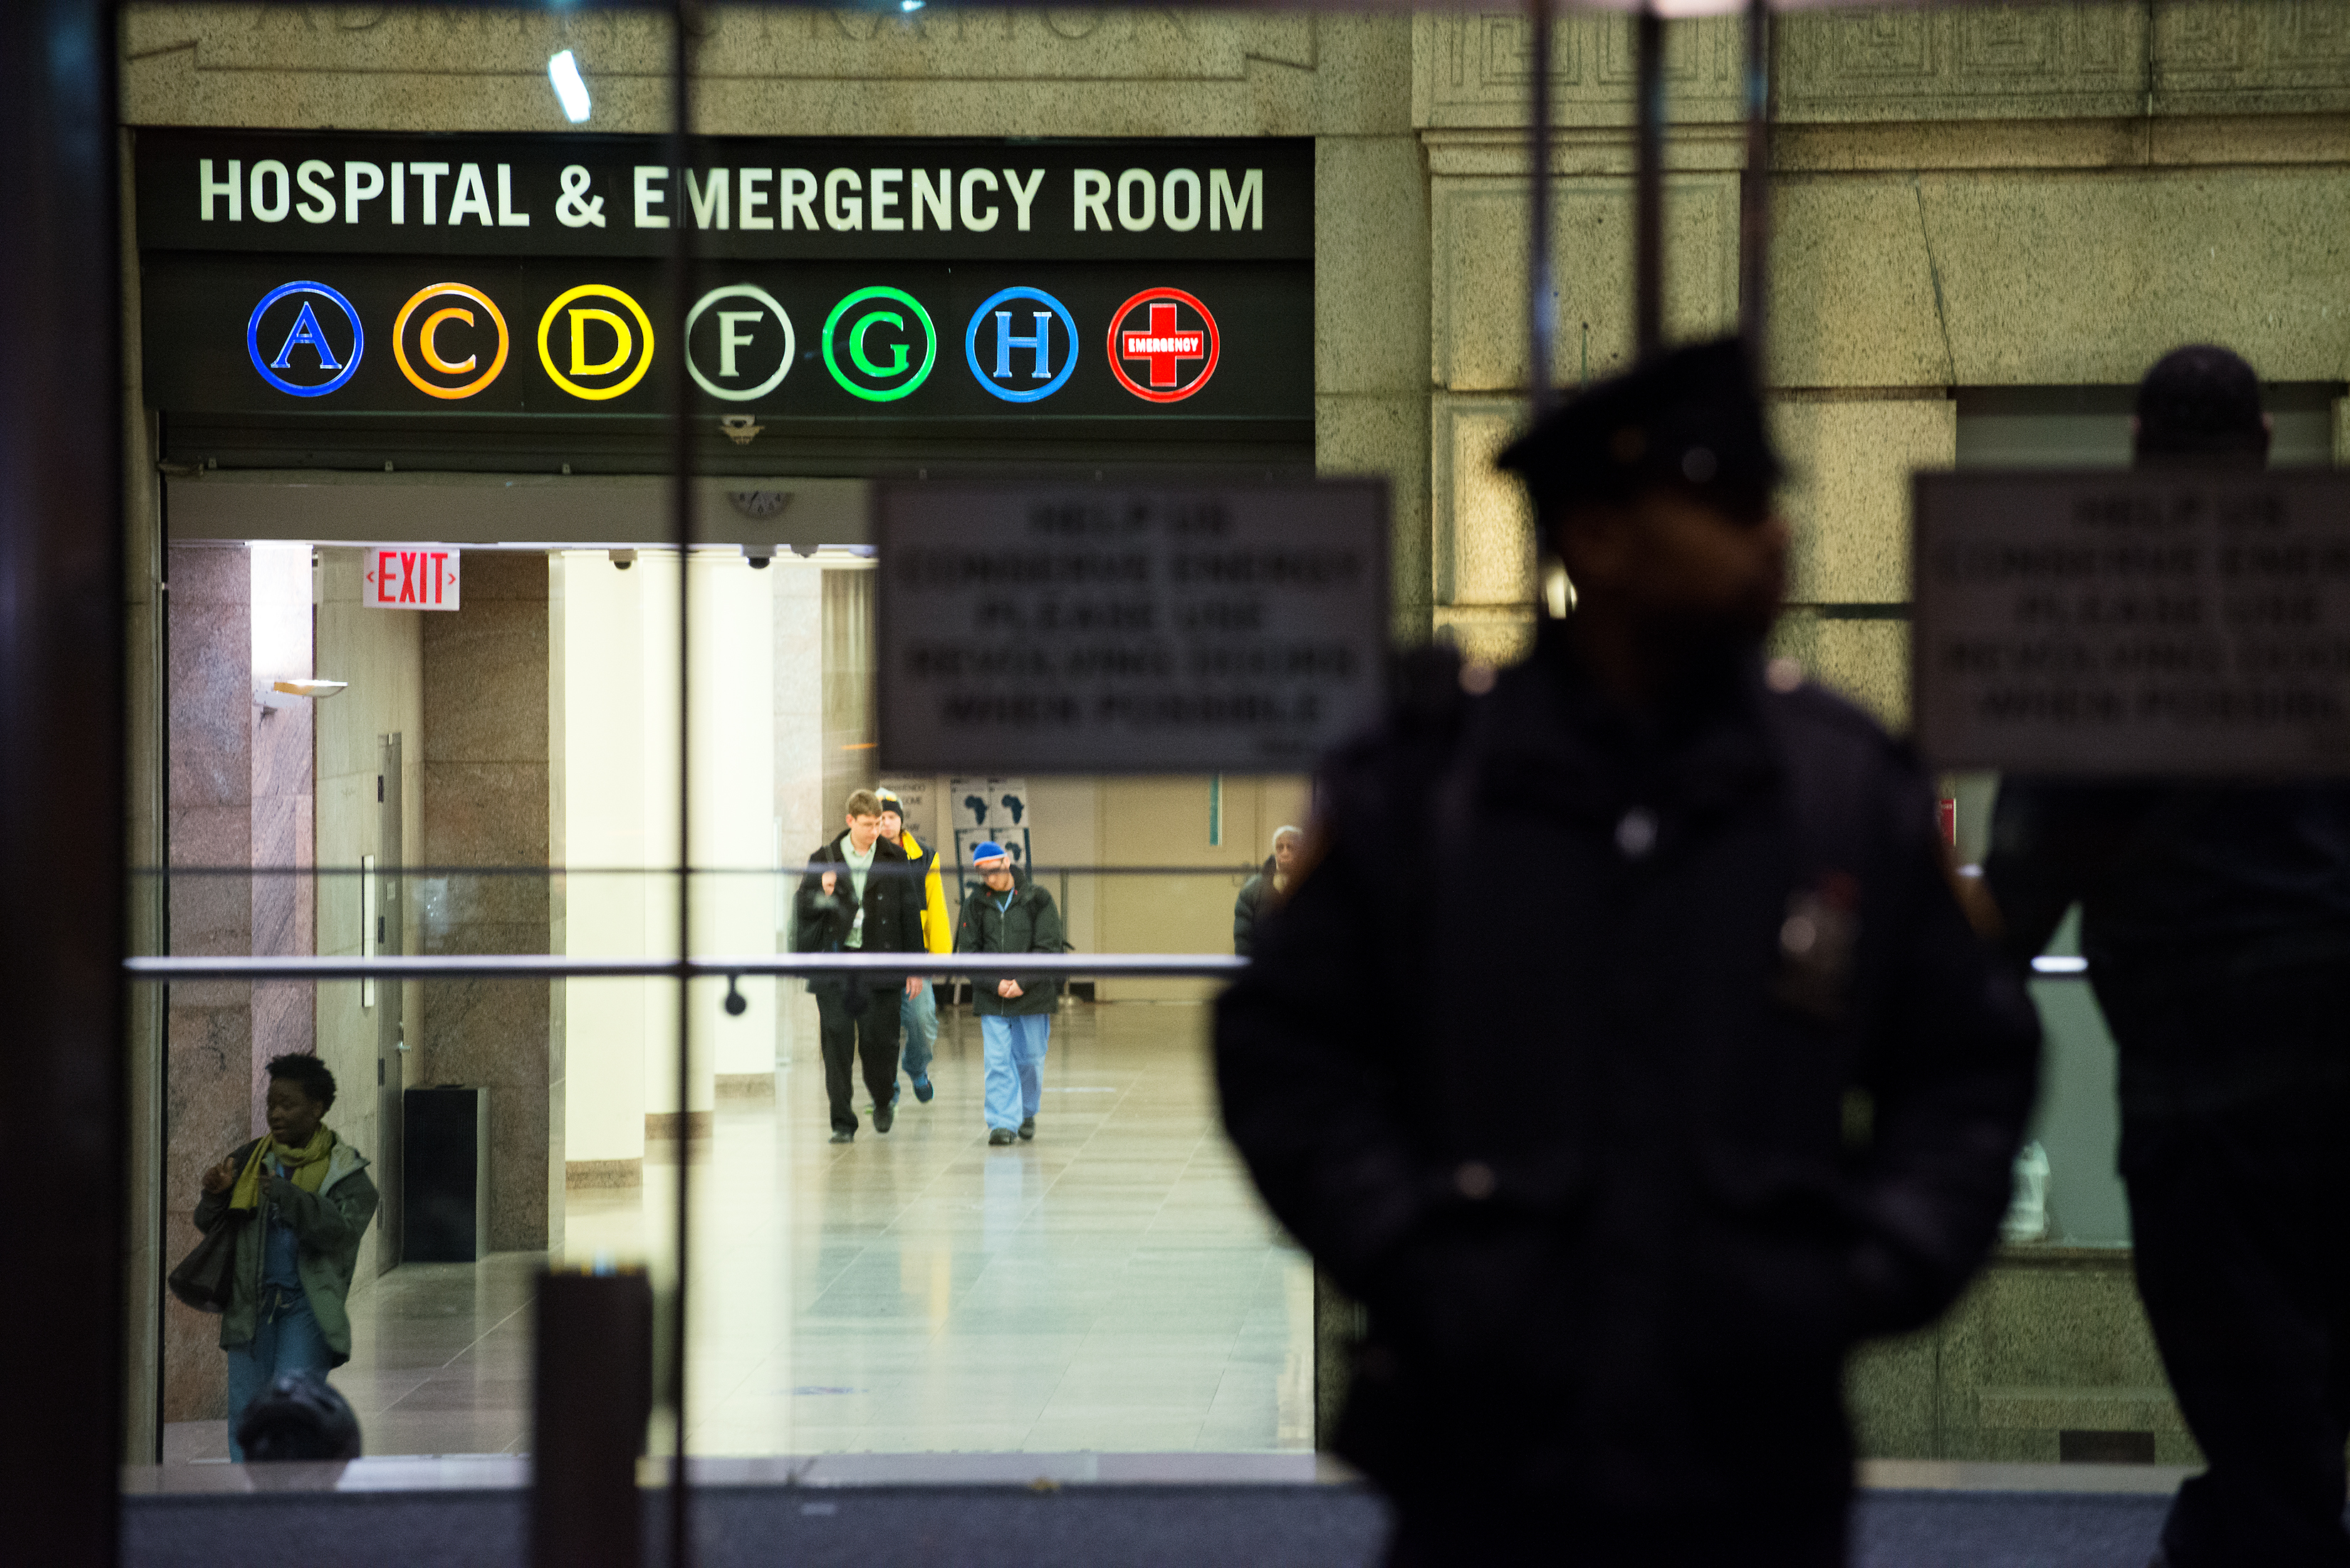 A New York City Police officer stands at the entrance to Bellevue Hospital October 23, 2014 in New York City. (Bryan Thomas—Getty Images)